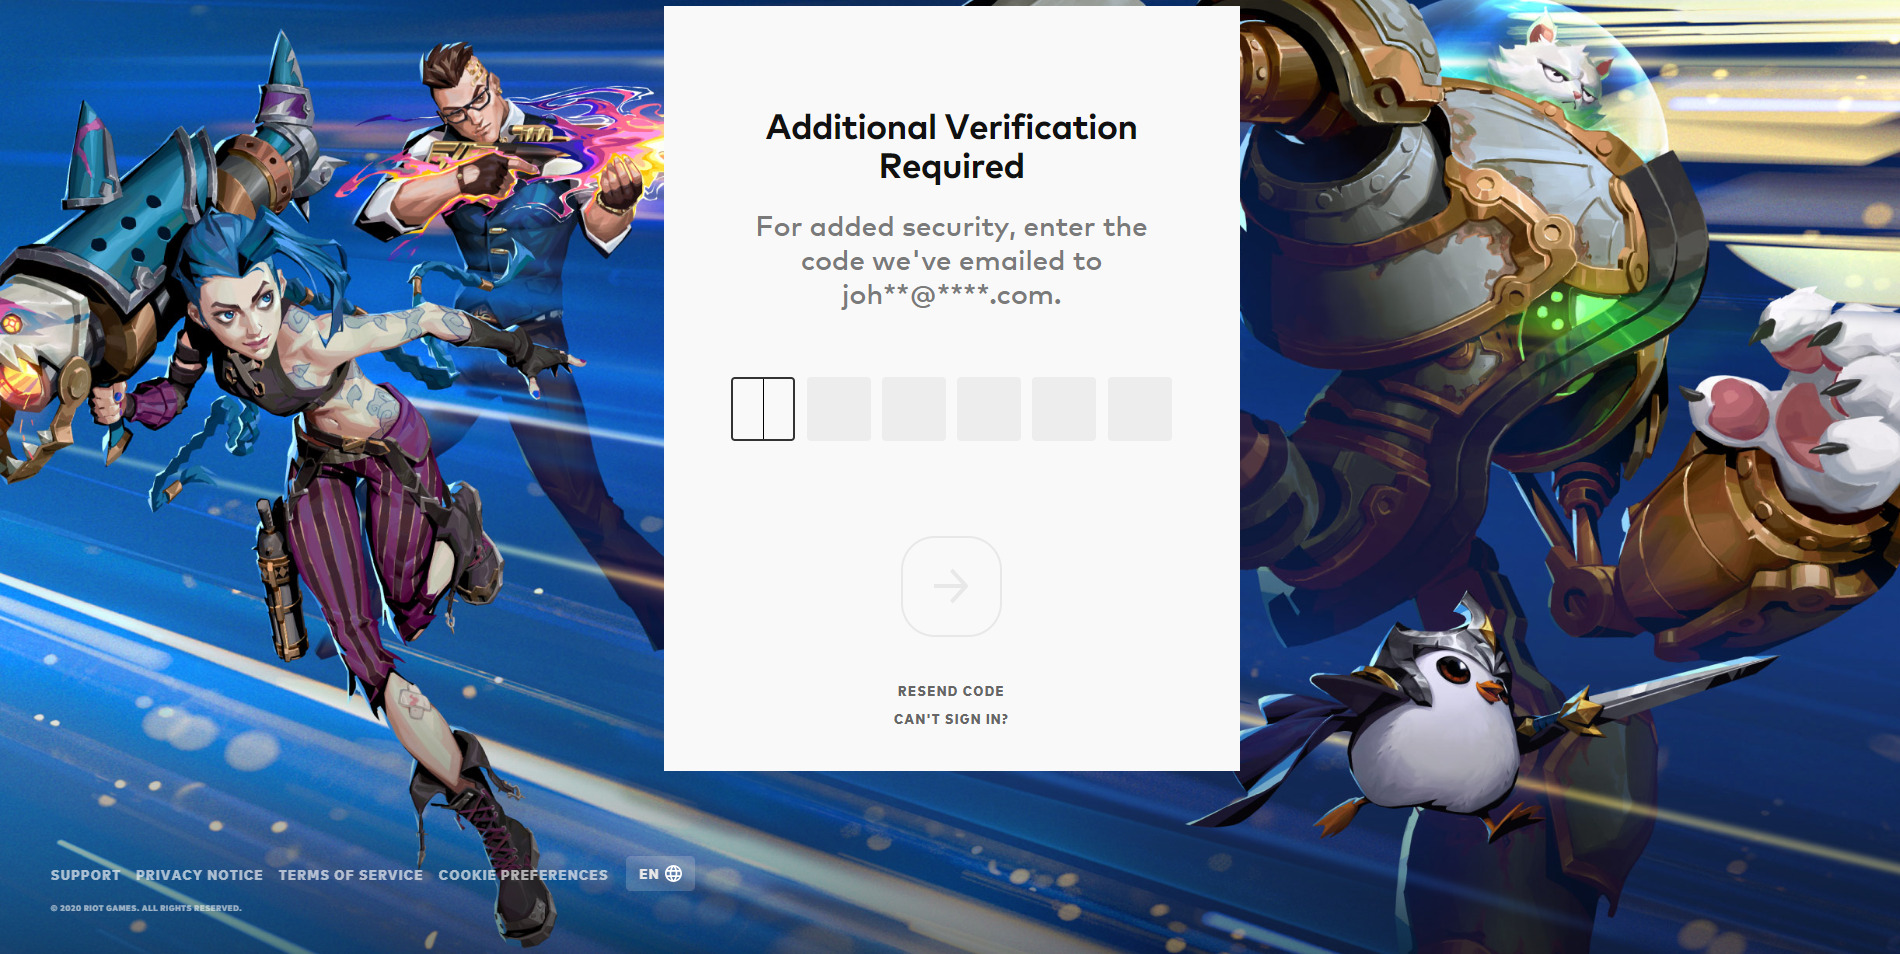 A screenshot of the additional verification required screen in Valorant